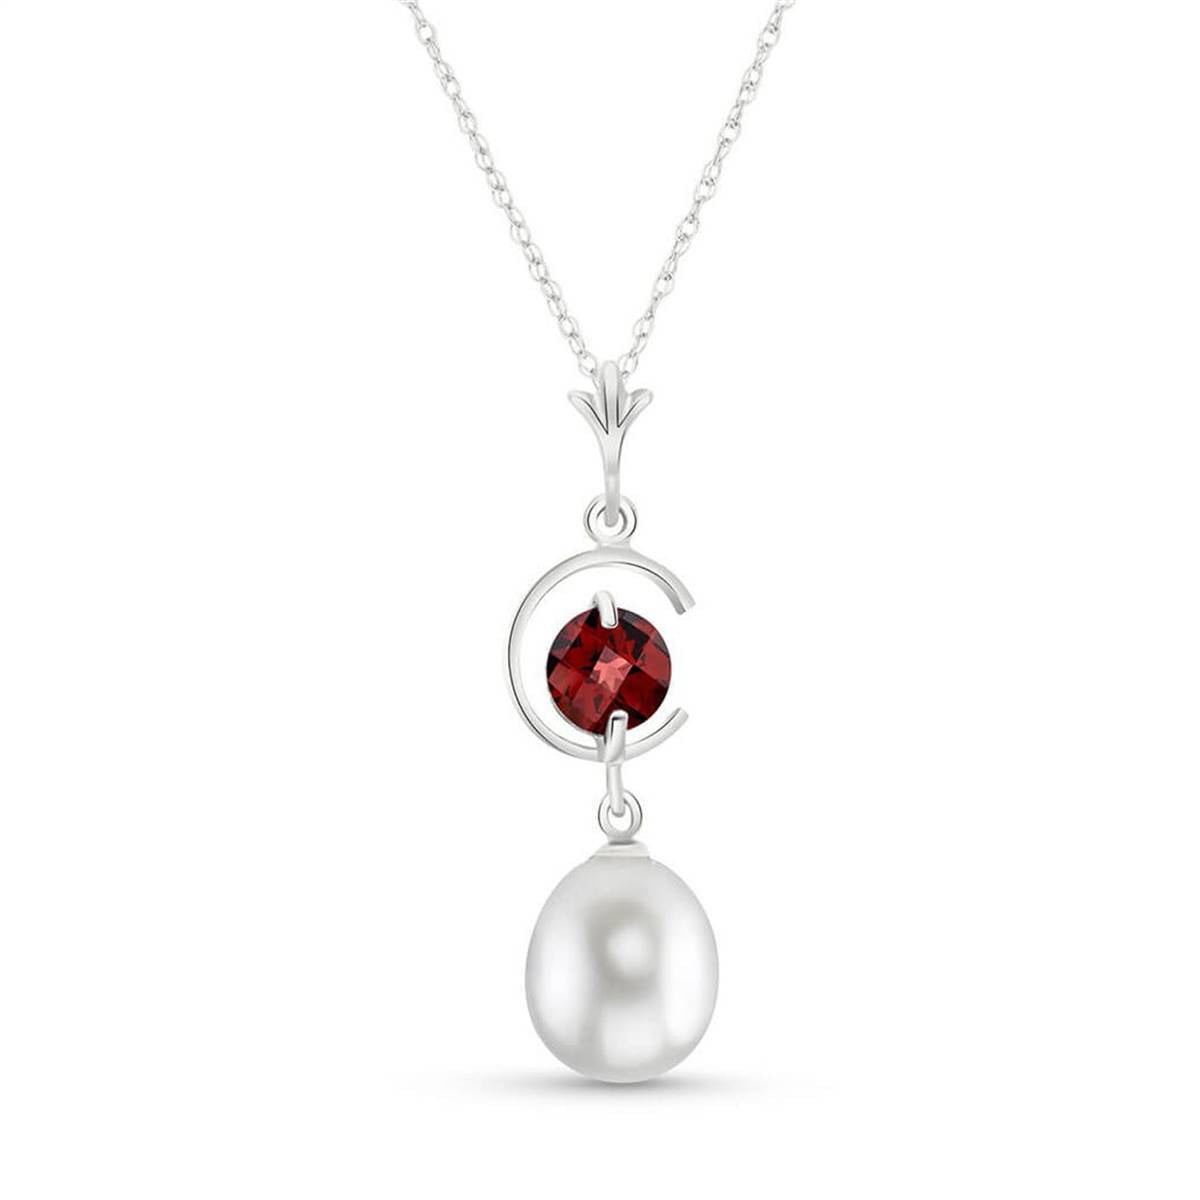 4.5 Carat 14K Solid White Gold Day And Night Garnet Pearl Necklace